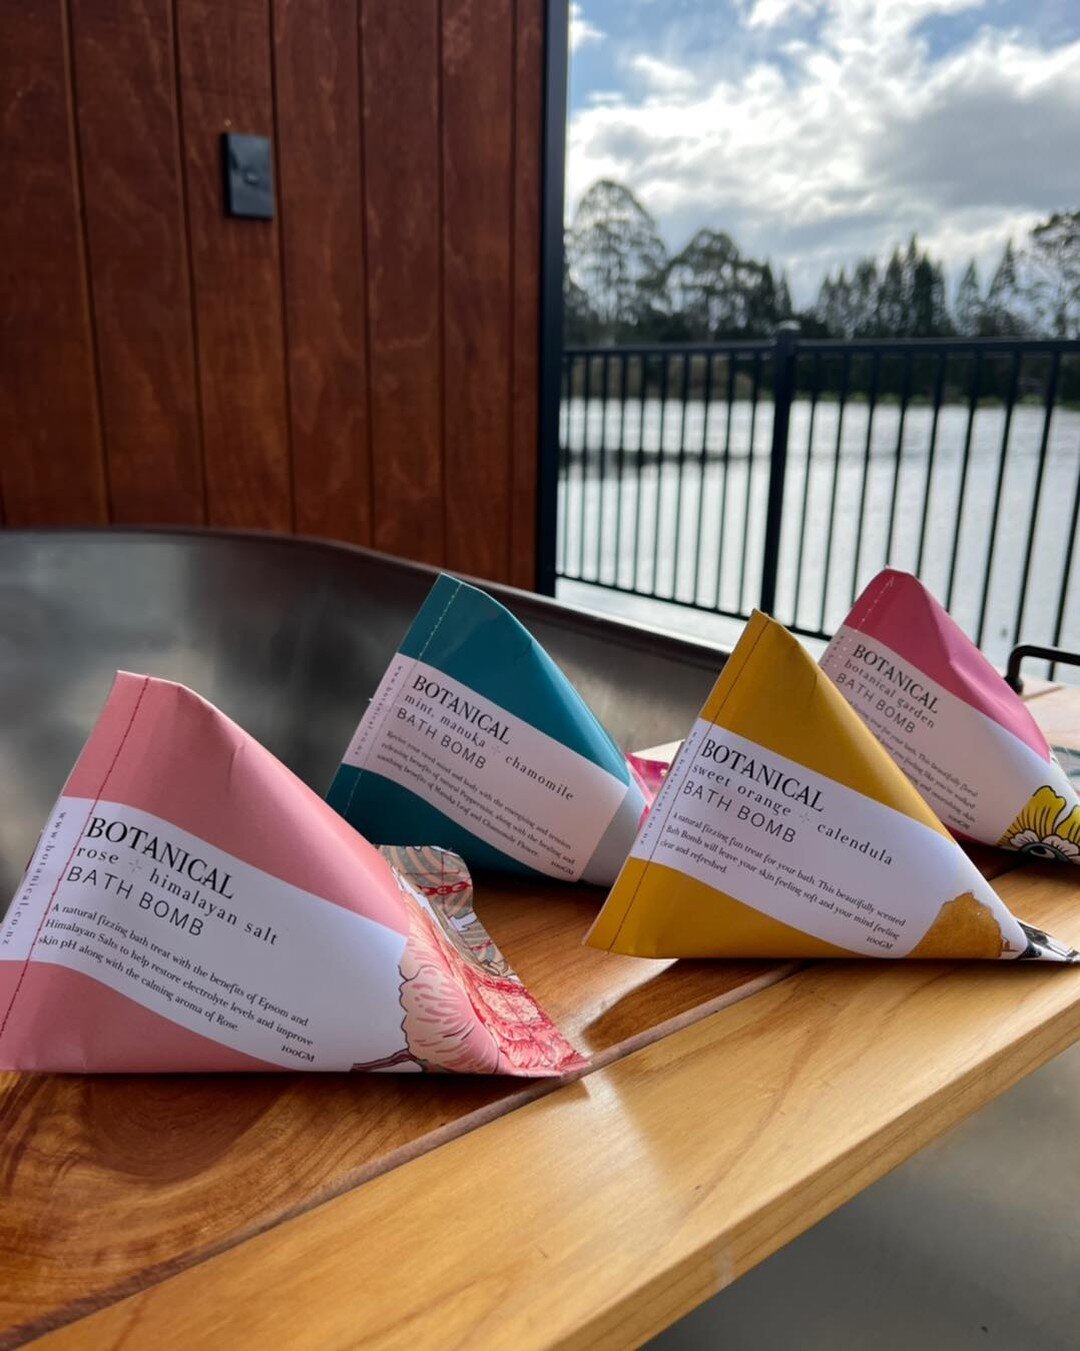 We are so excited to be adding a new range of natural bath bombs from @botanicalskincare_nz 😍 
Make sure you try out one of these fizzing fun treats! 😌🥰

-We will be finishing up using the rest of our previous bath bombs before we add these guys t